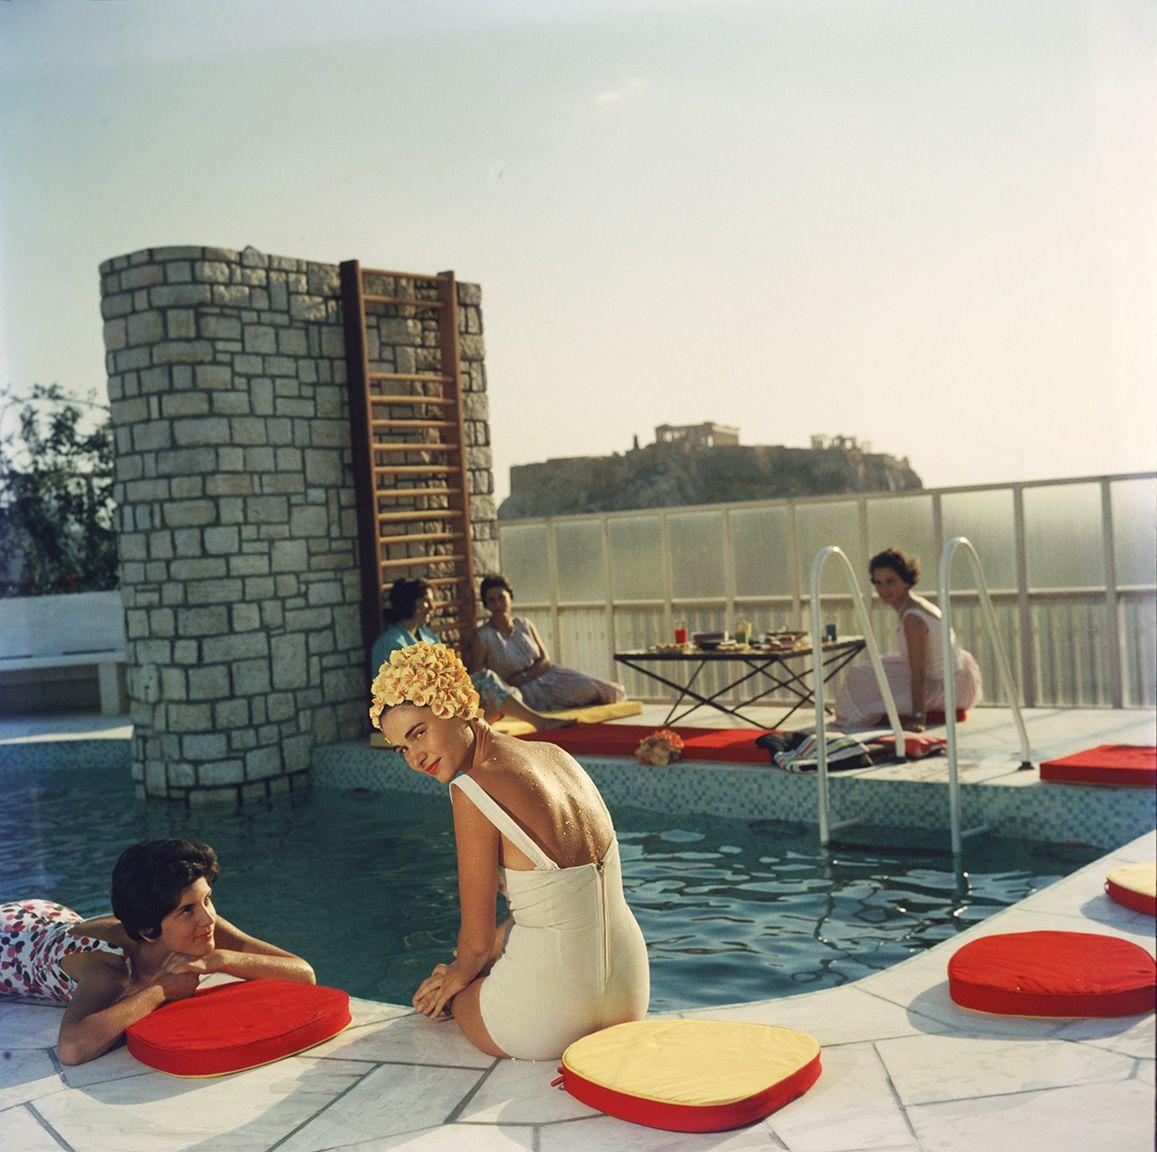 Slim Aarons Color Photograph - Penthouse Pool, 1961: Young women by the Canellopoulos penthouse pool, Athens